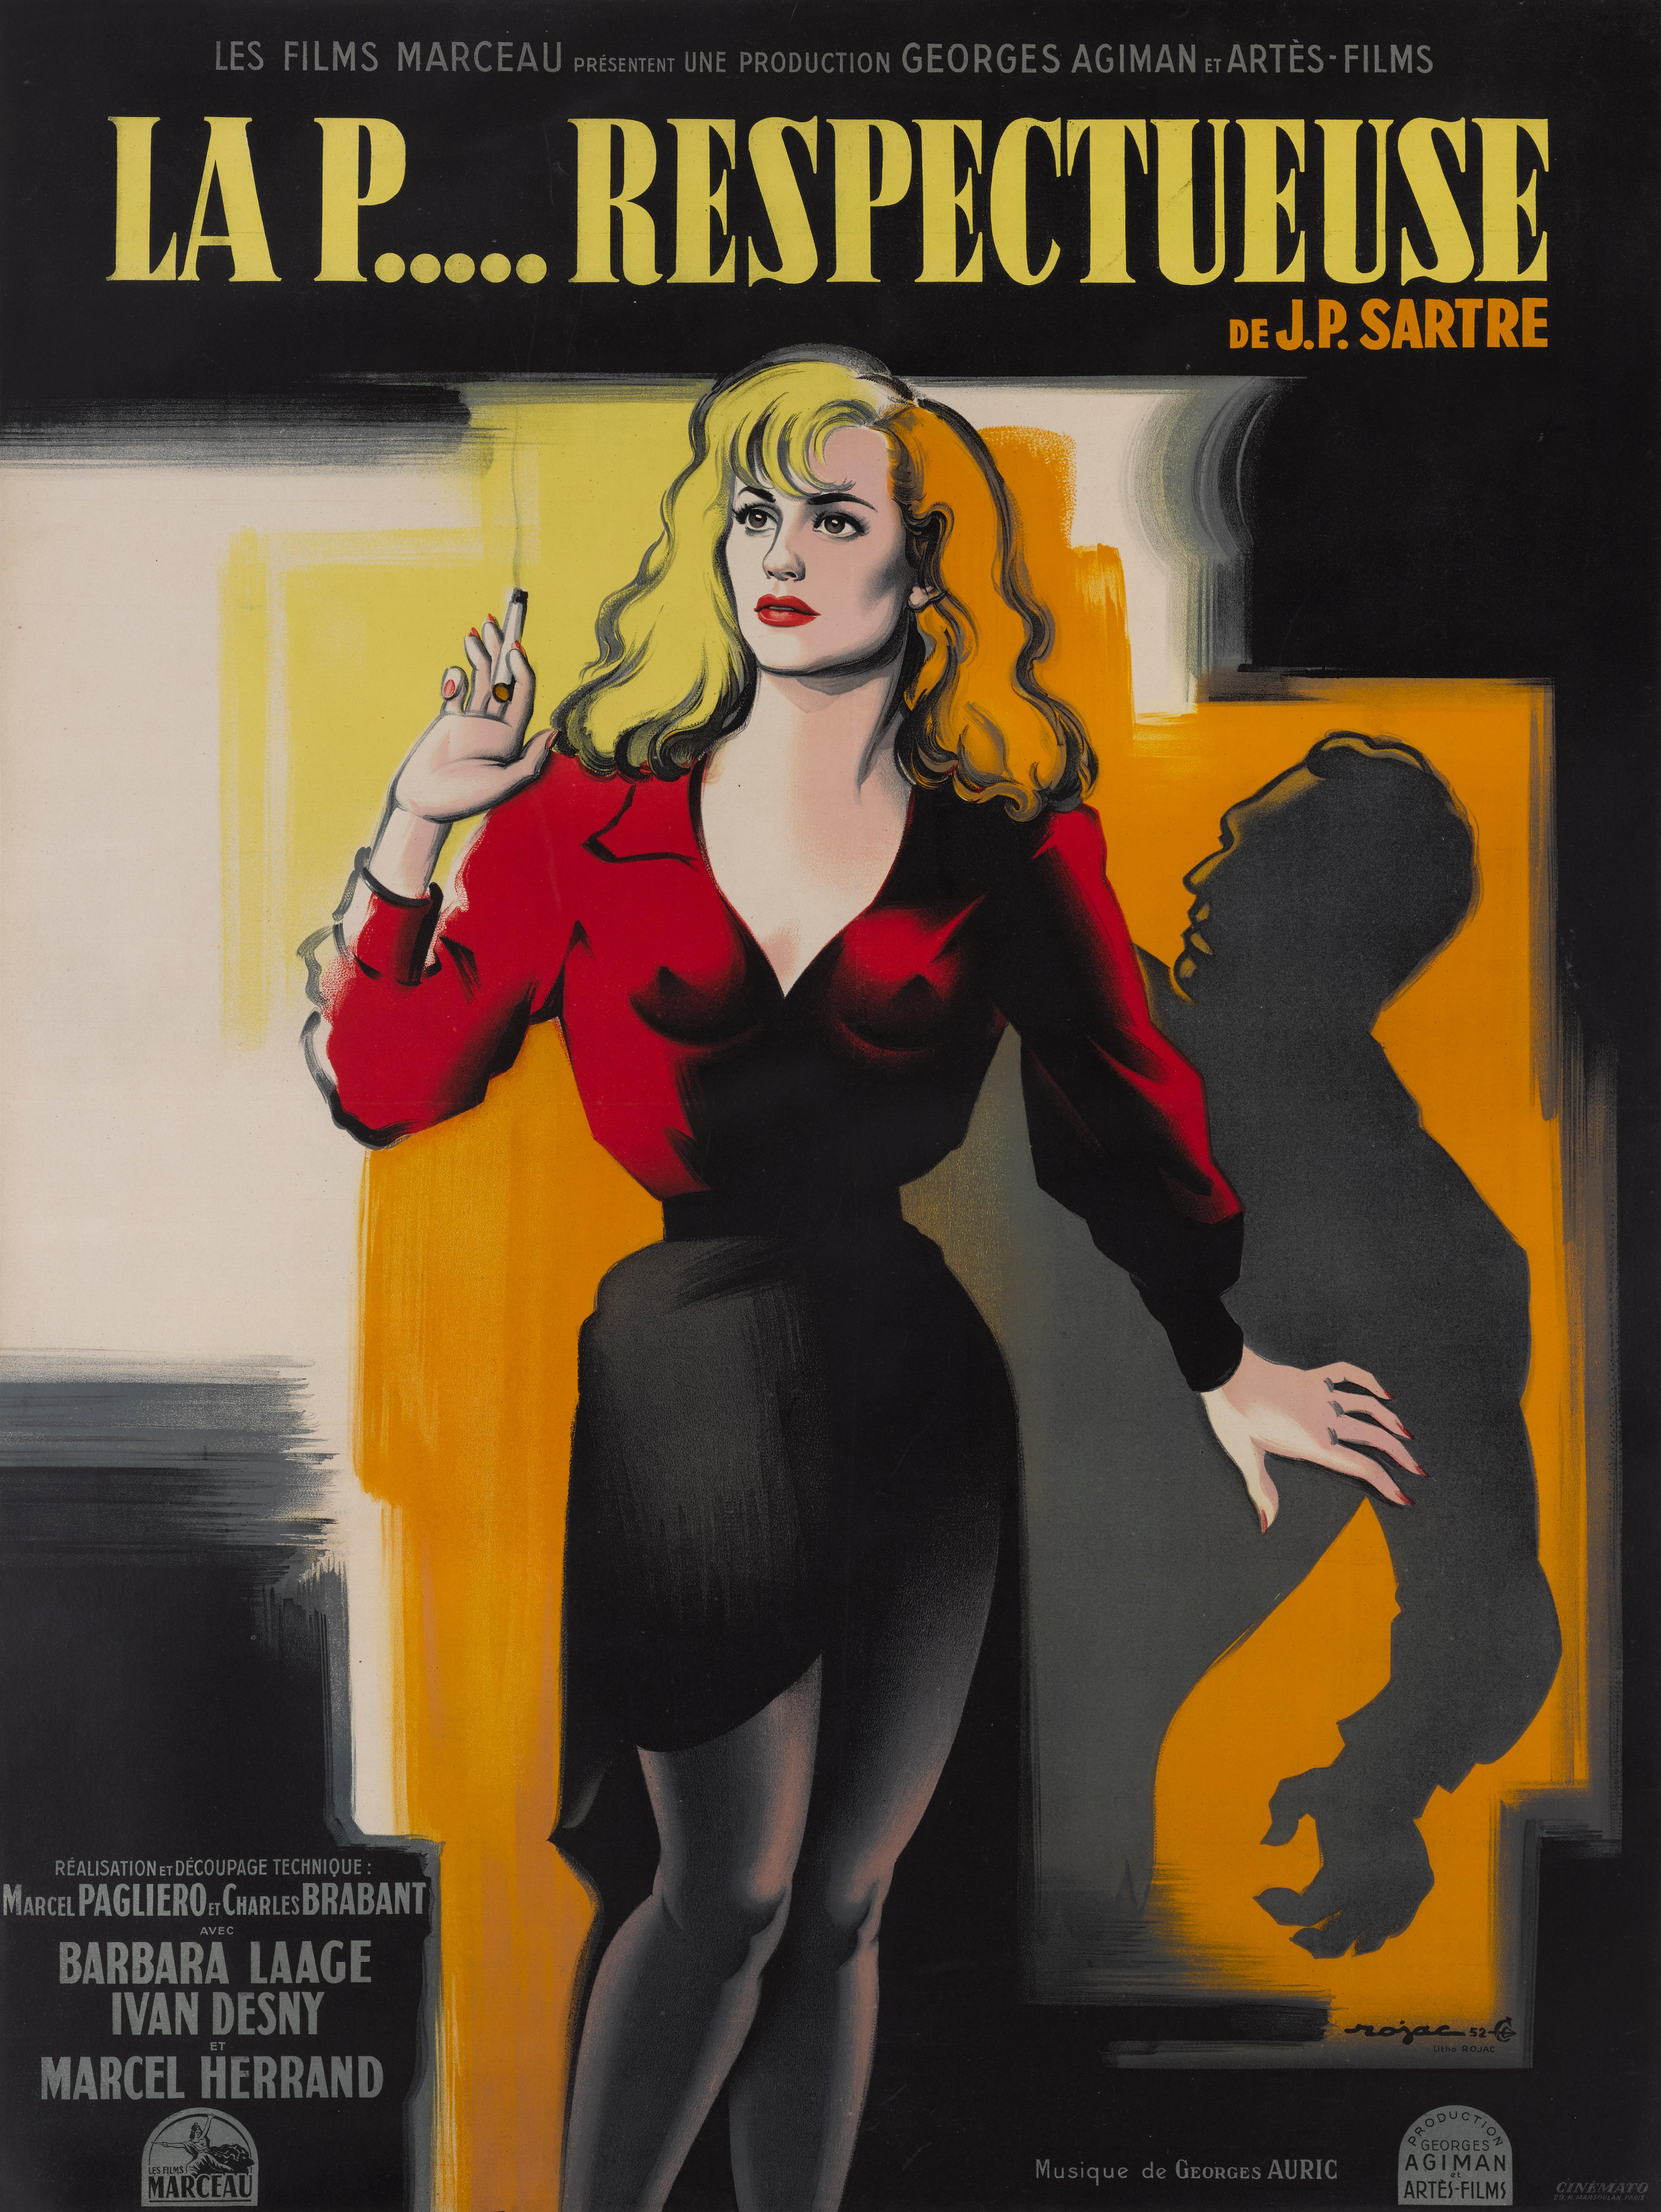 Original French film poster for the 1952 drama German 
Directed by Charles Brabant and Marcello Pagliero.
The art work on this poster is by the French poster artist Roger Jacquier (Rojac) (dates unknown)
It is very Unusual to find an unfolded